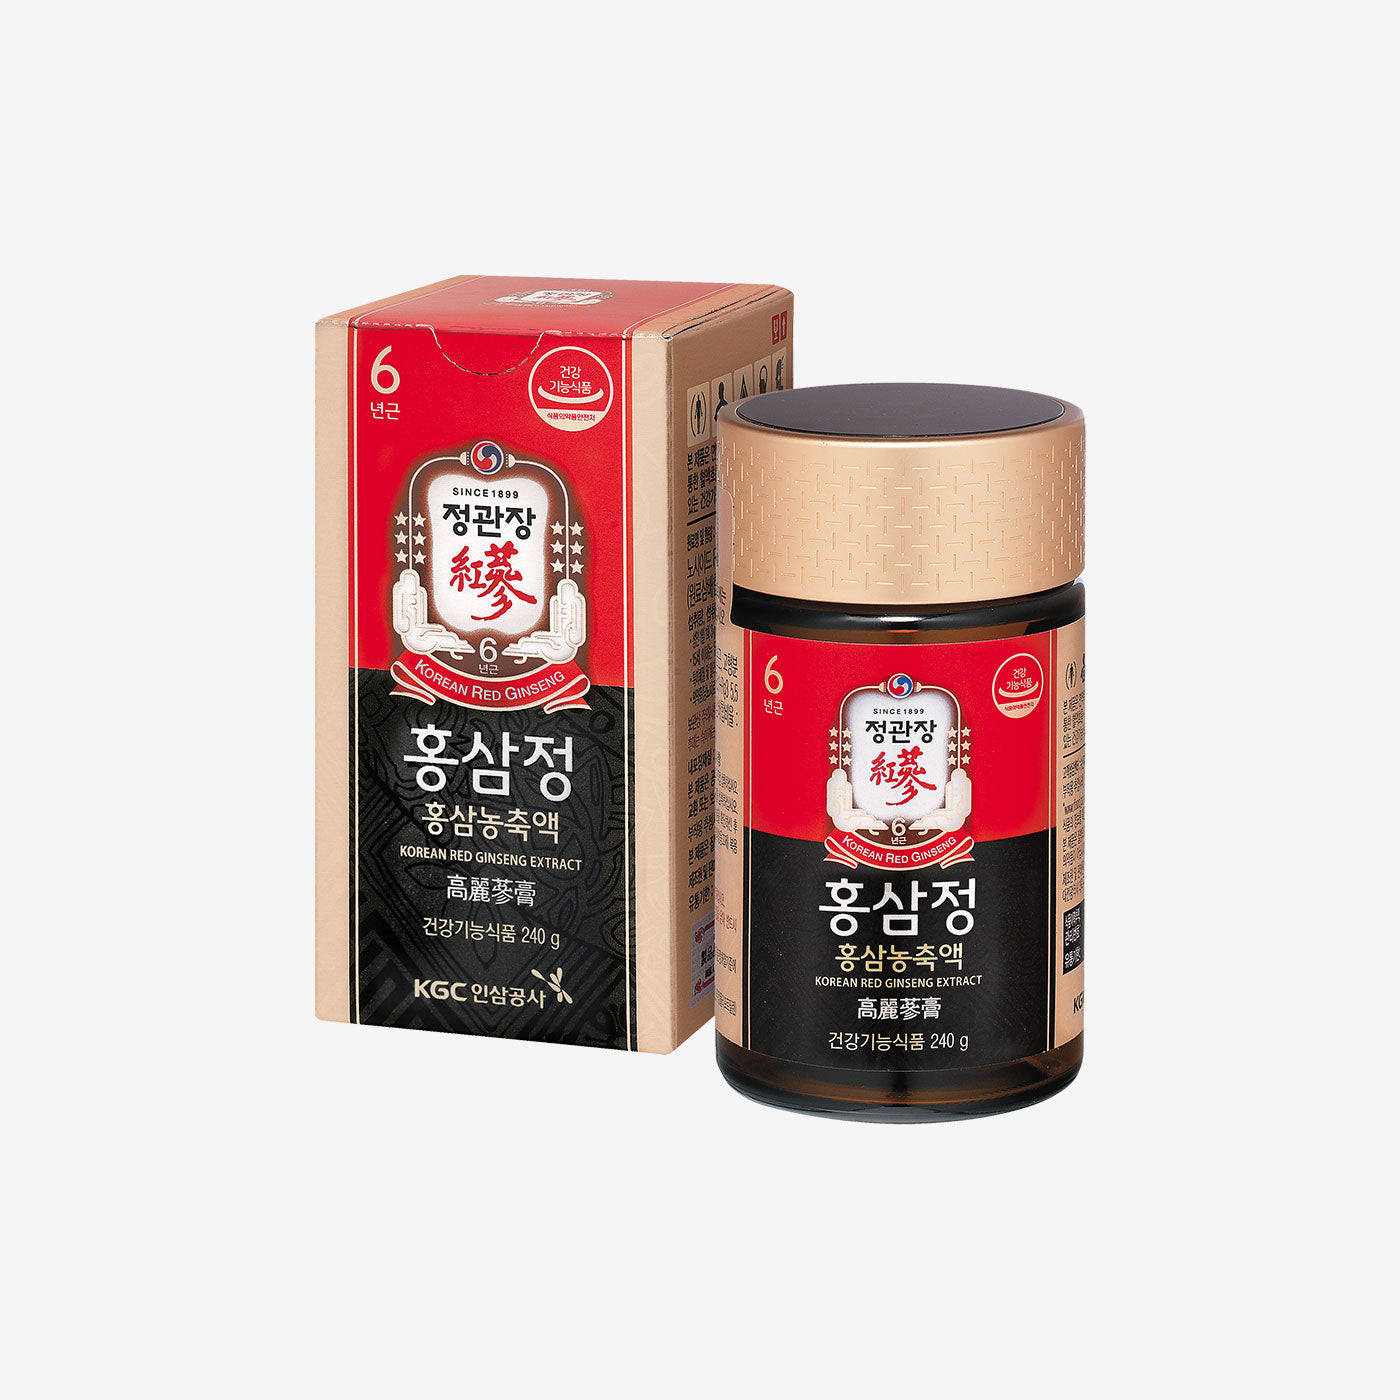 Korea Red Ginseng Capsule Korea Rea Ginseng Extract Capsule 1 Bottle (1 can x 30 capsules)